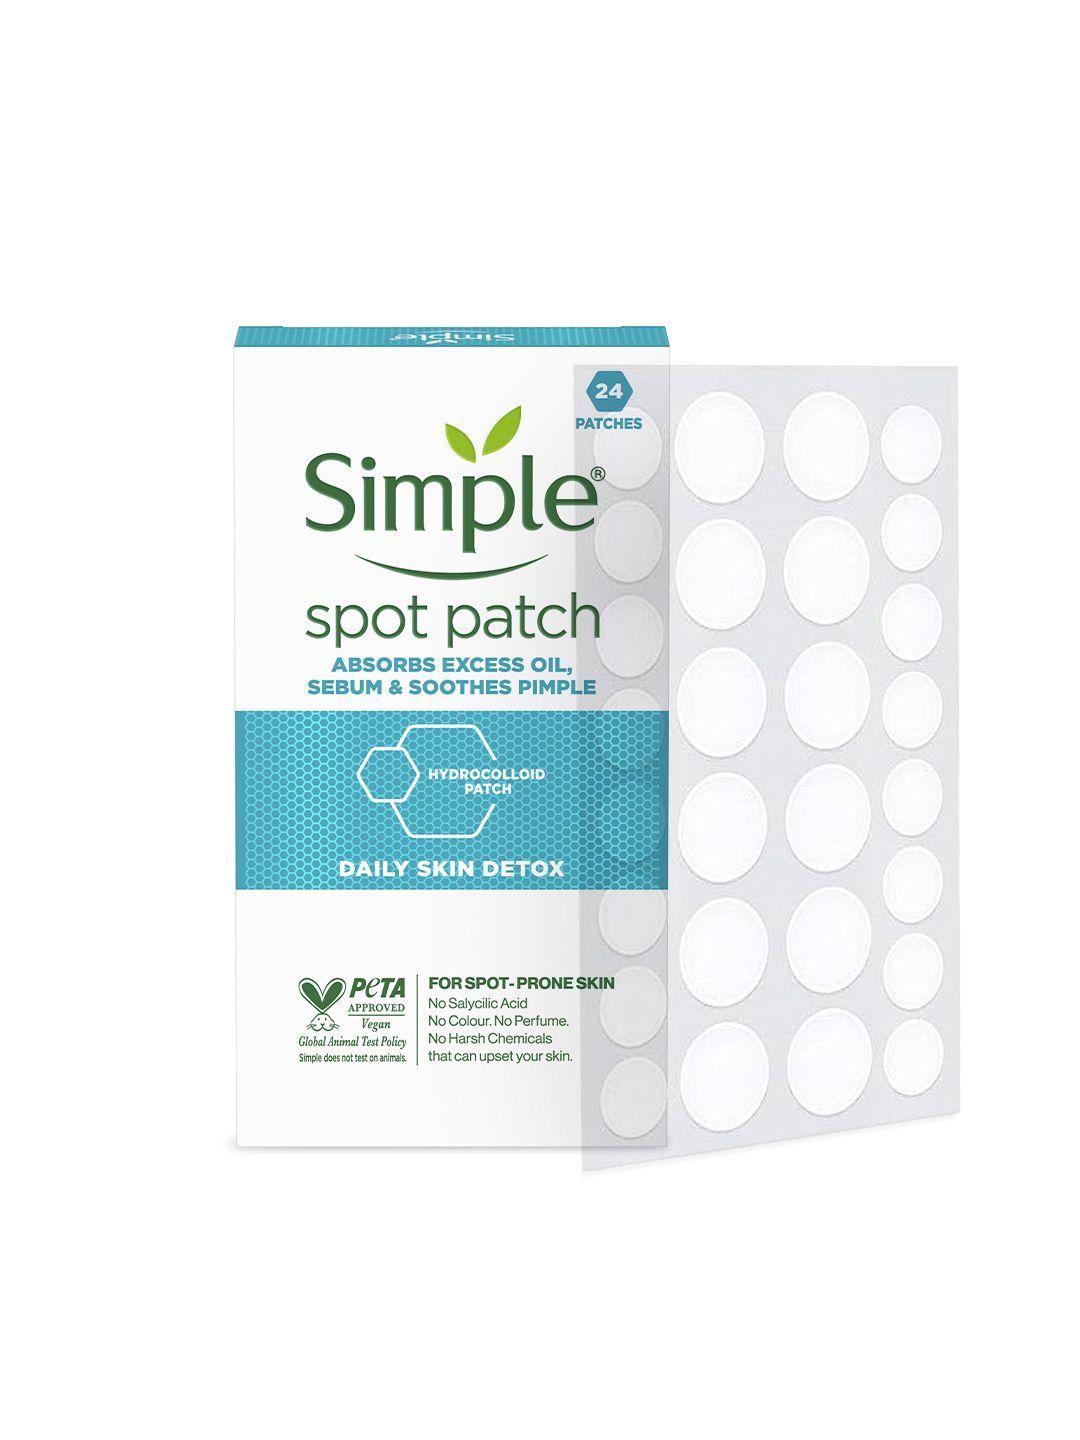 simple daily skin detox spot patch for spot-prone skin - 24 patches